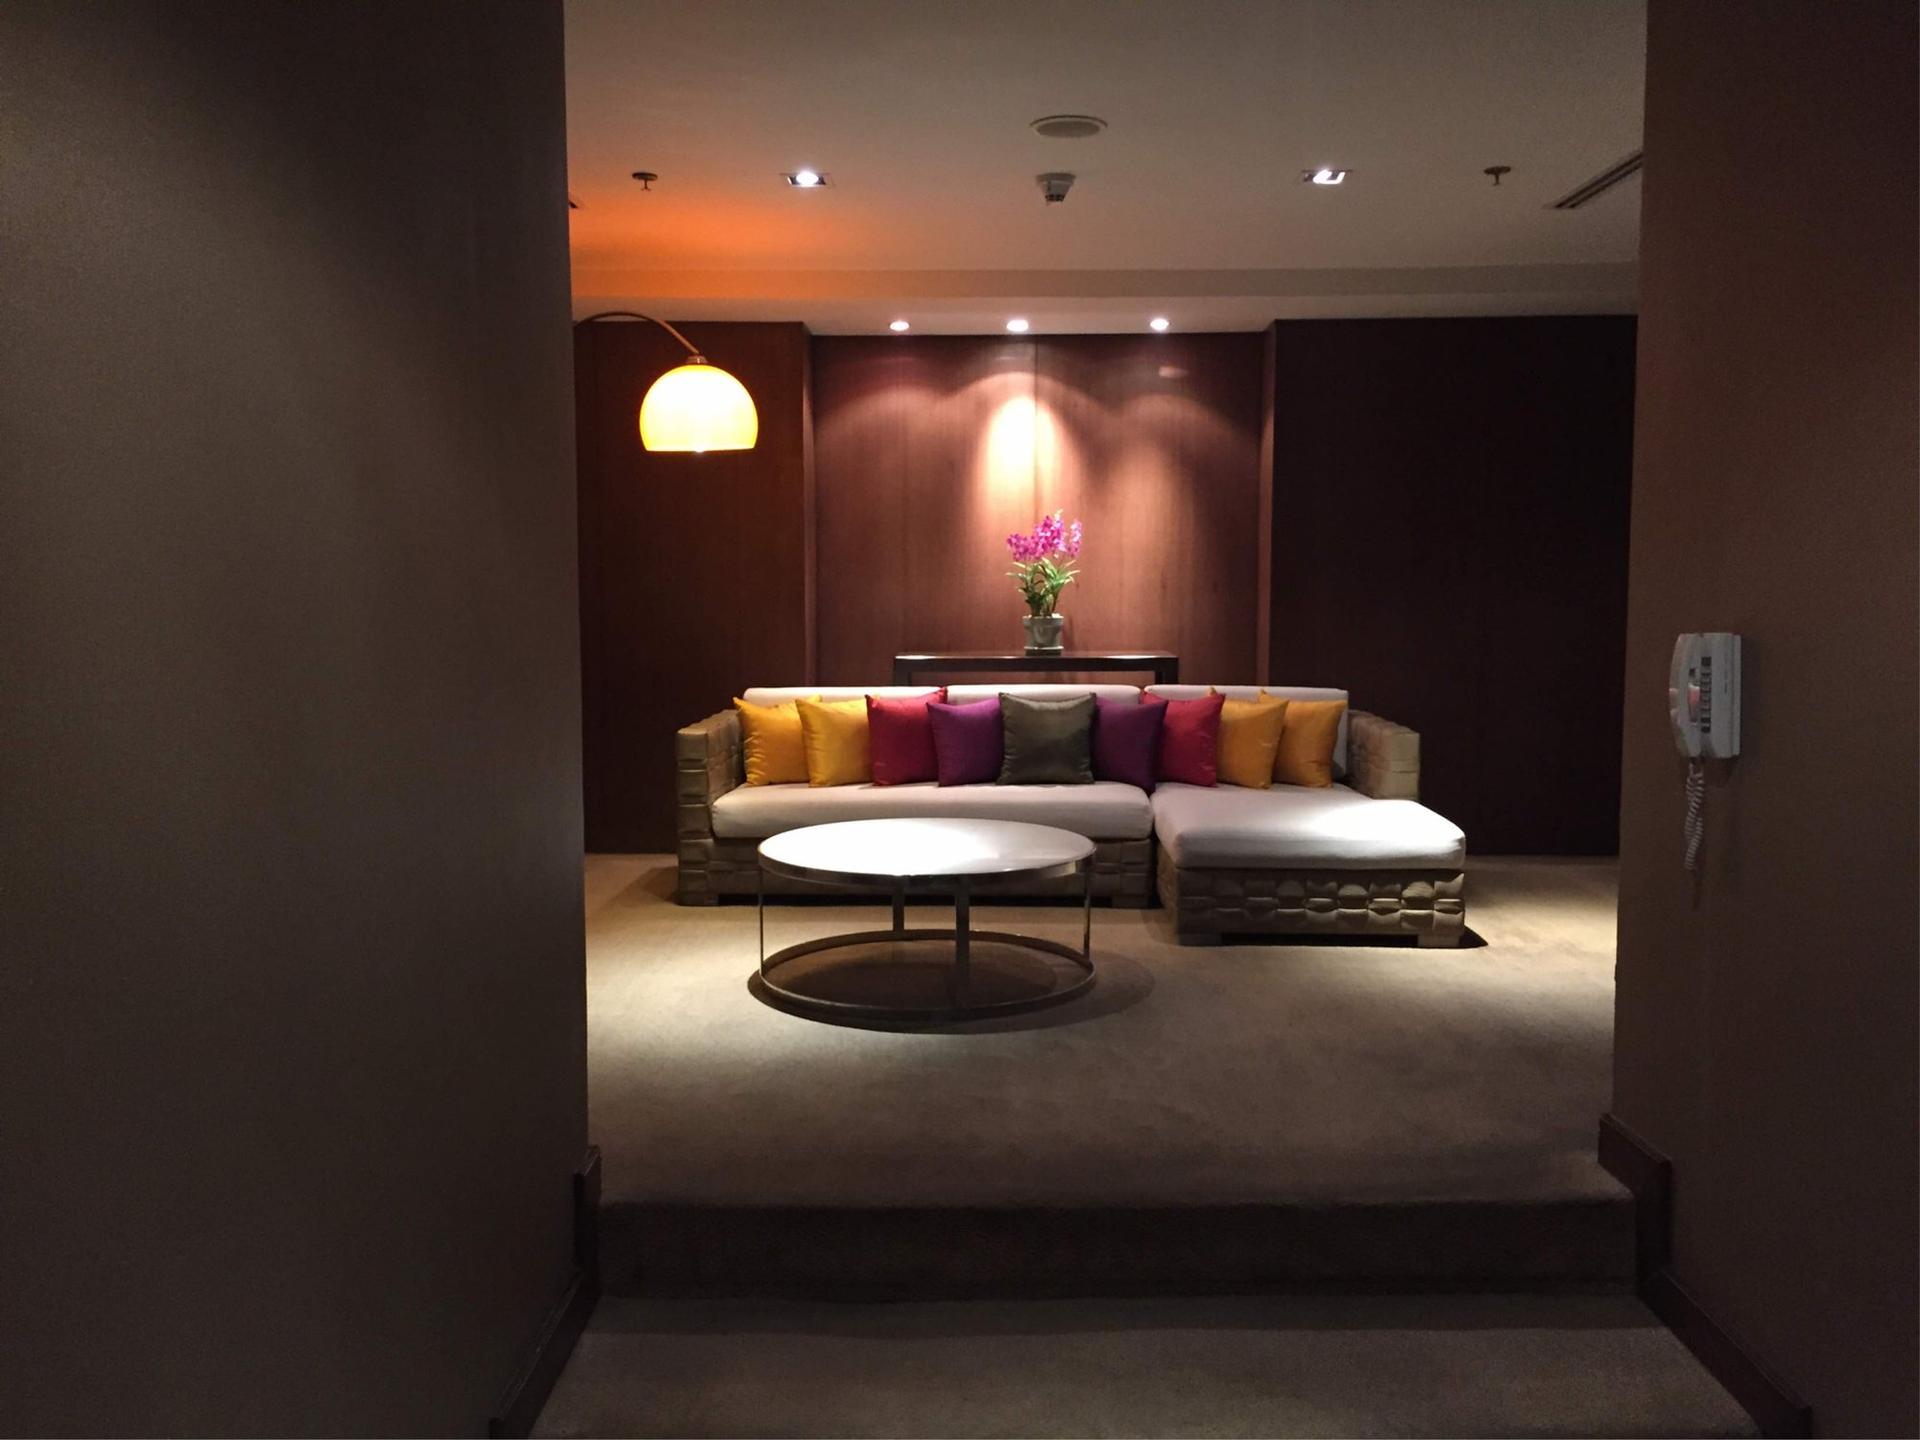 Thai Airways Royal First Class Lounge image 31 of 44